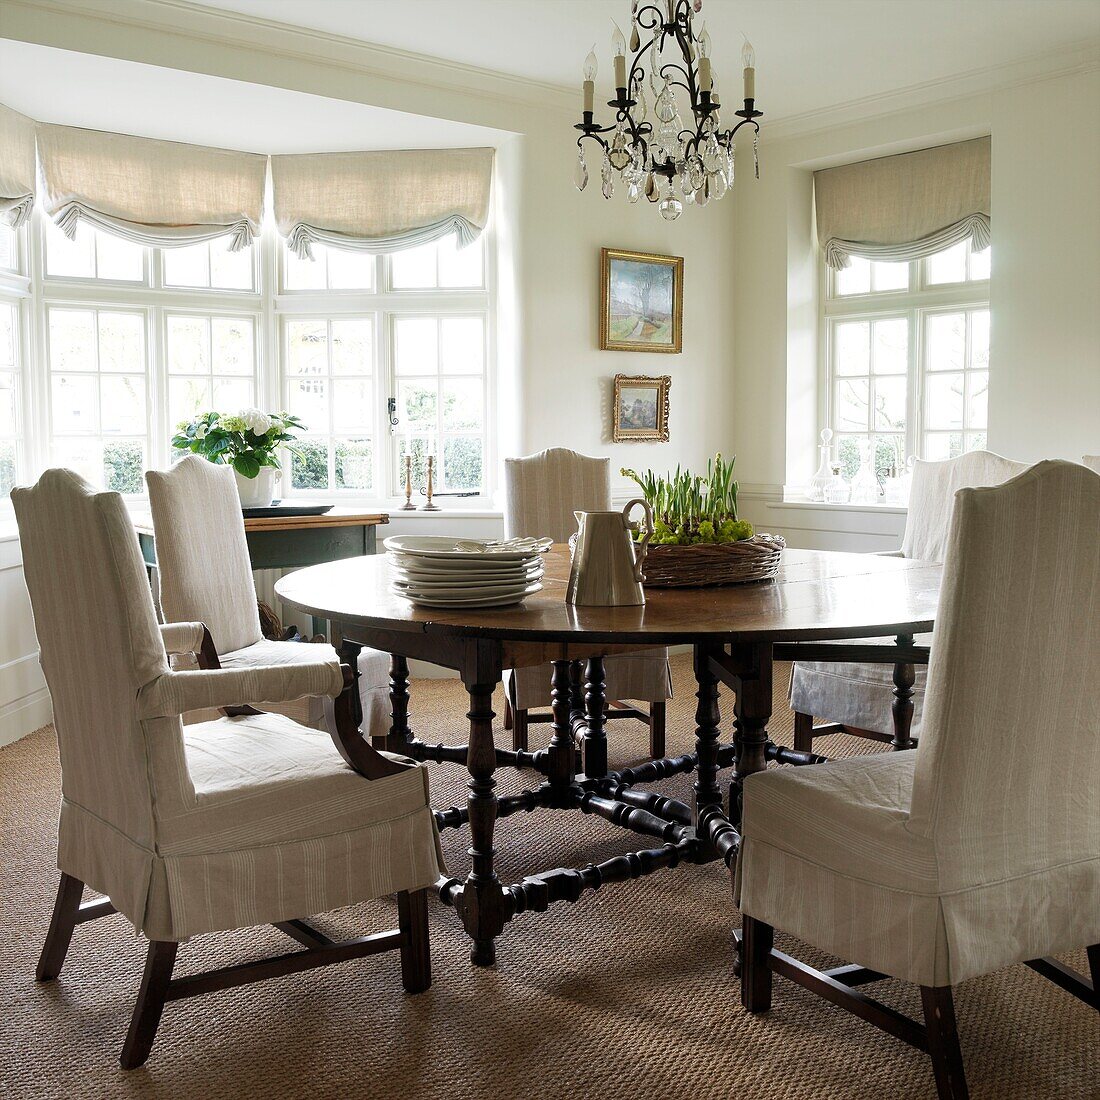 Dining room with slipcover chairs